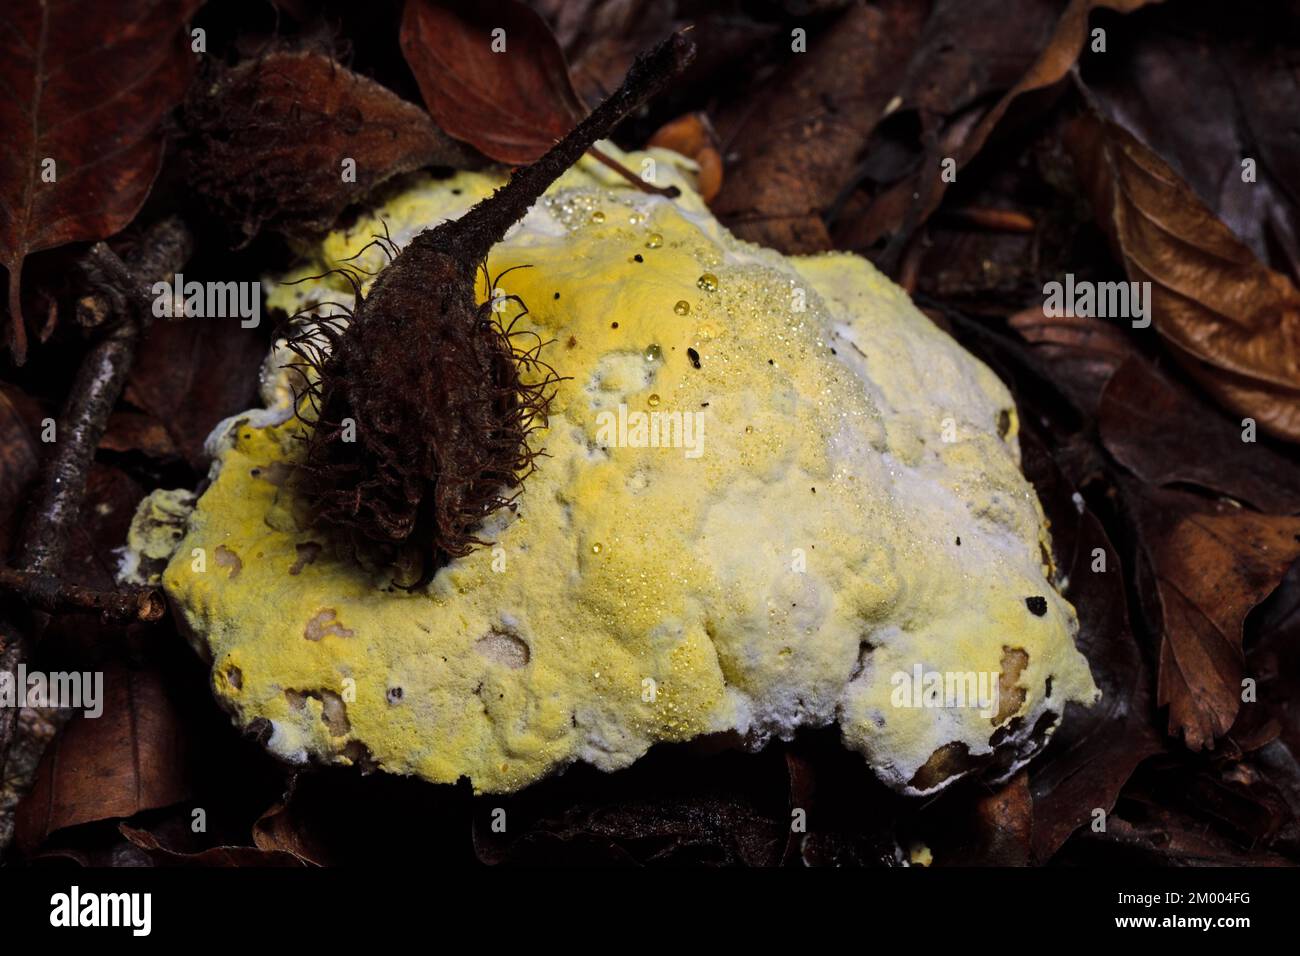 dog vomit slime mold, witch's butter Fruit body lemon yellow foamy formation with beech on brown autumn leaves Stock Photo